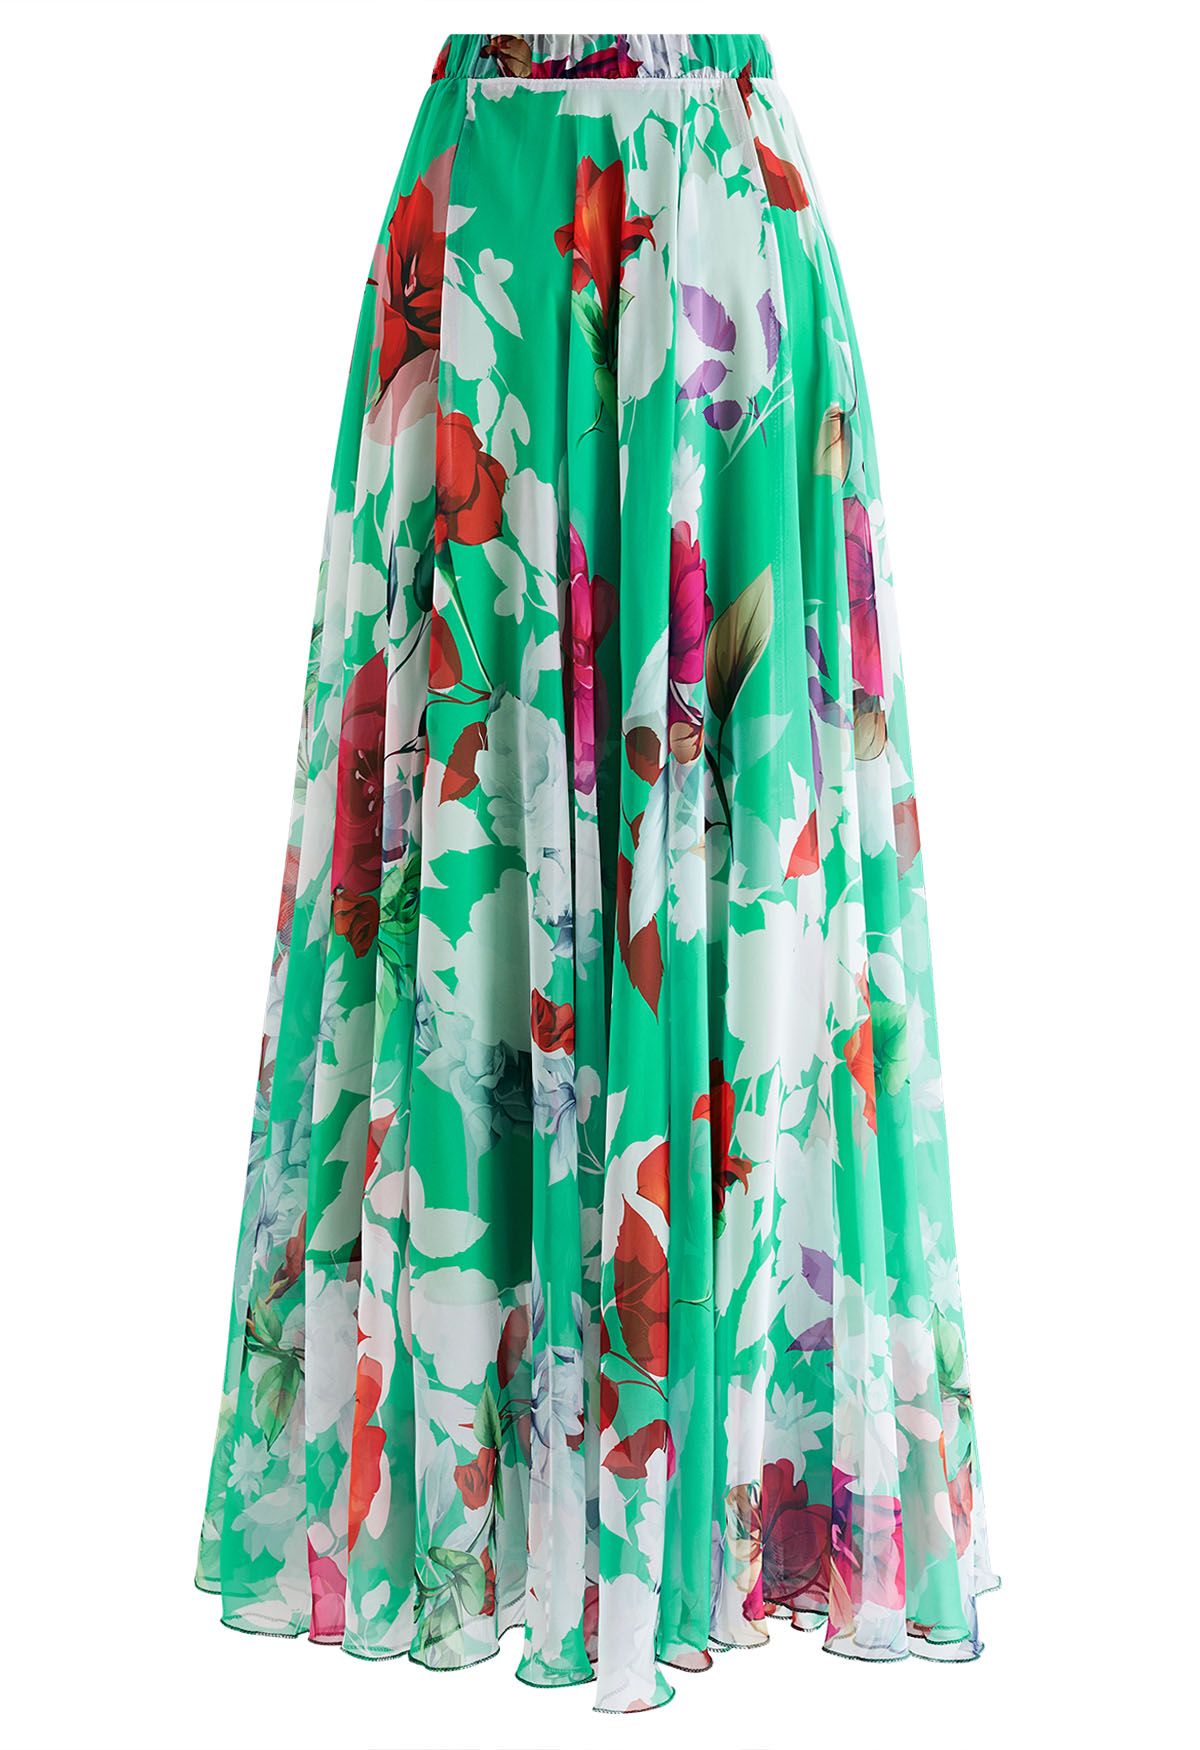 Best Blooms Rose Printed Chiffon Maxi Skirt in Green